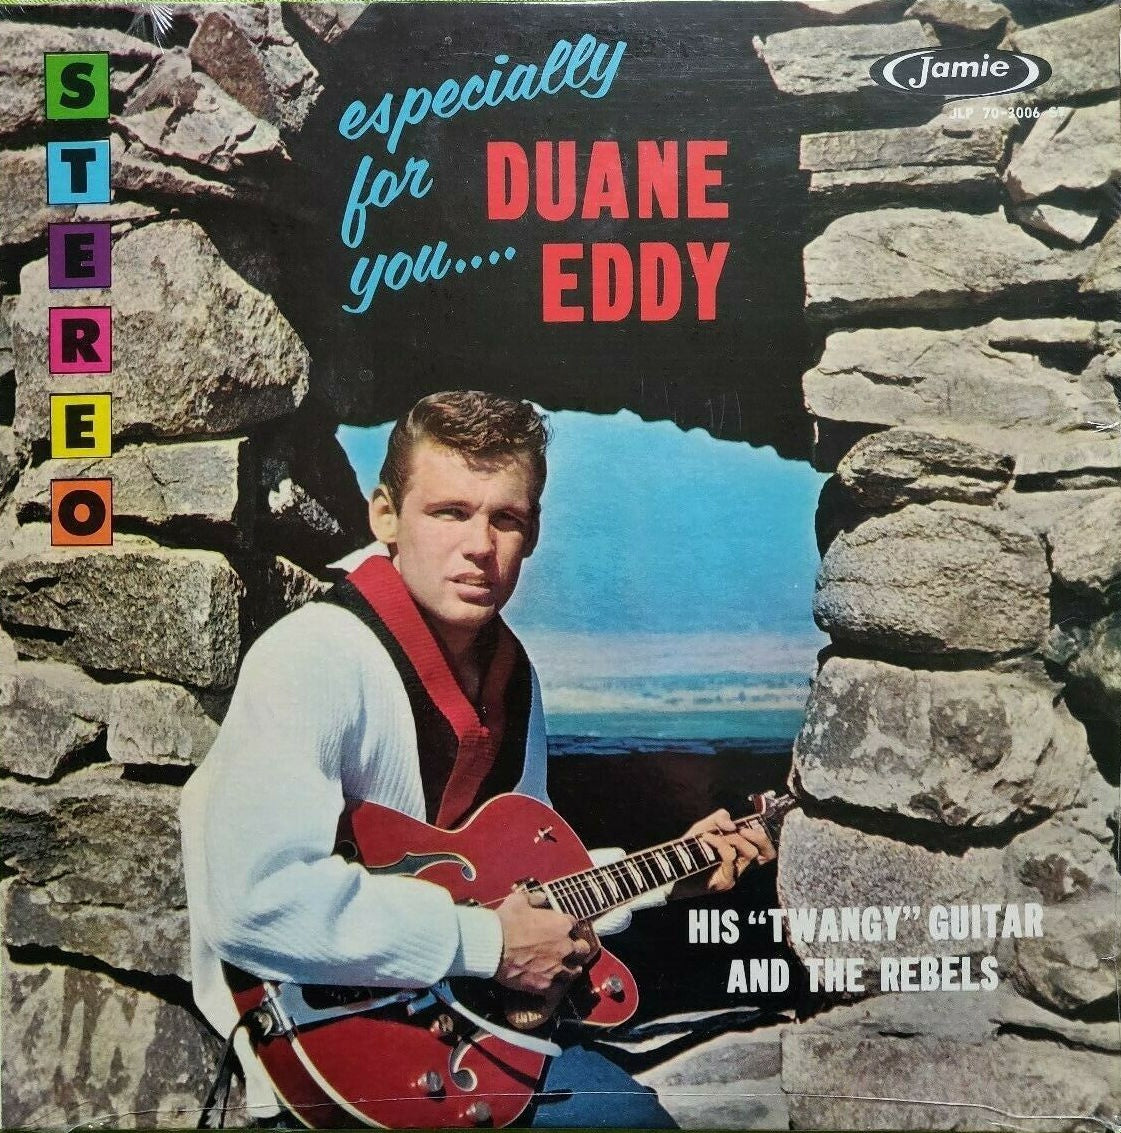 Duane Eddy His "Twangy" Guitar And The Rebels ‎– Especially For You - VG+ Lp Recird 1959Jamie USA Stereo Original Vinyl - Rock & Roll